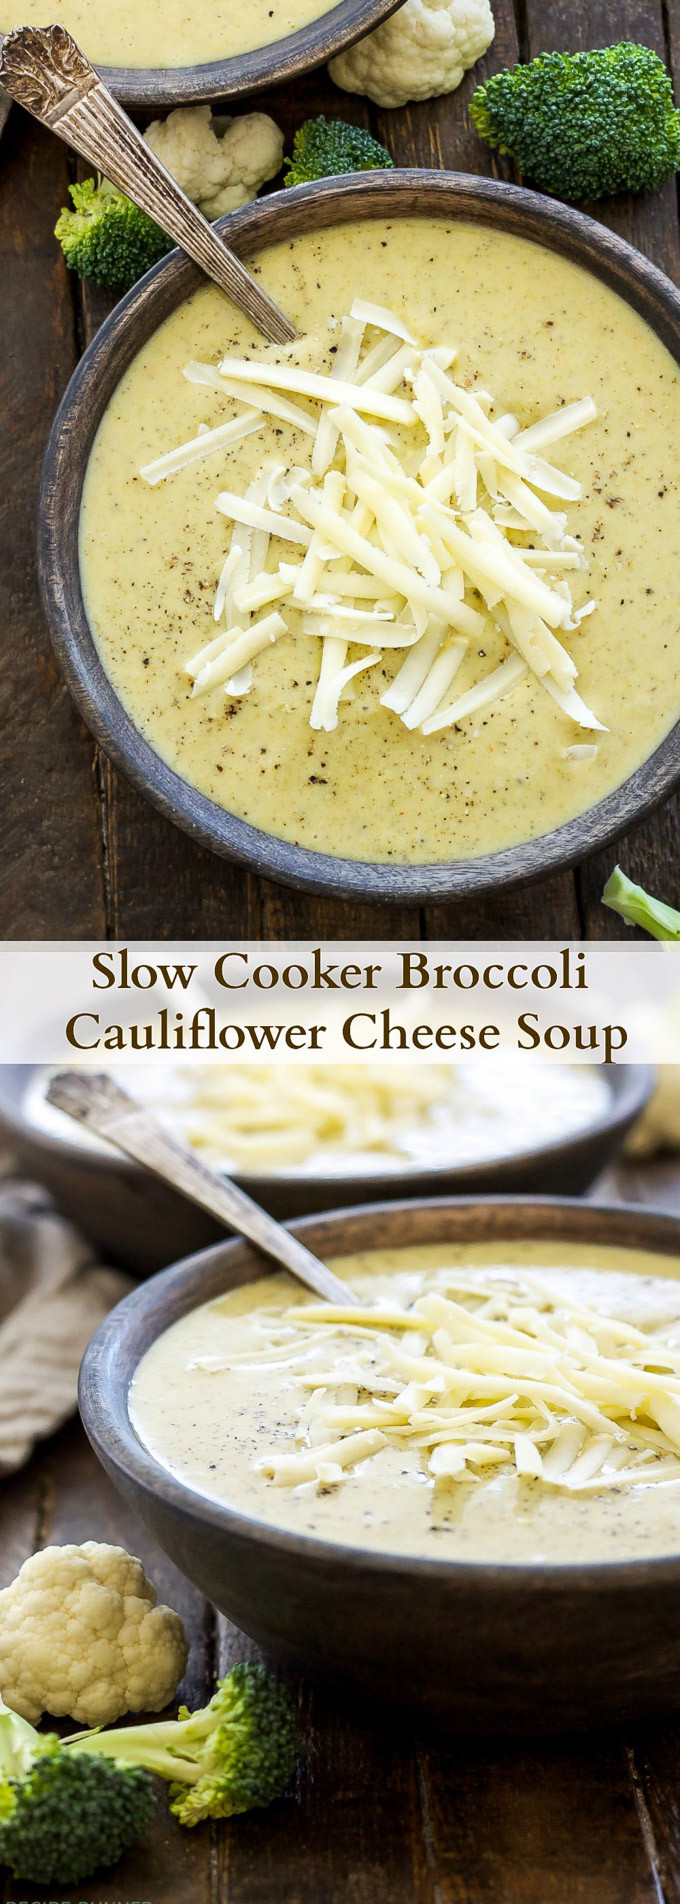 Broccoli Cheddar Soup Slow Cooker
 Slow Cooker Broccoli Cauliflower Cheese Soup Recipe Runner